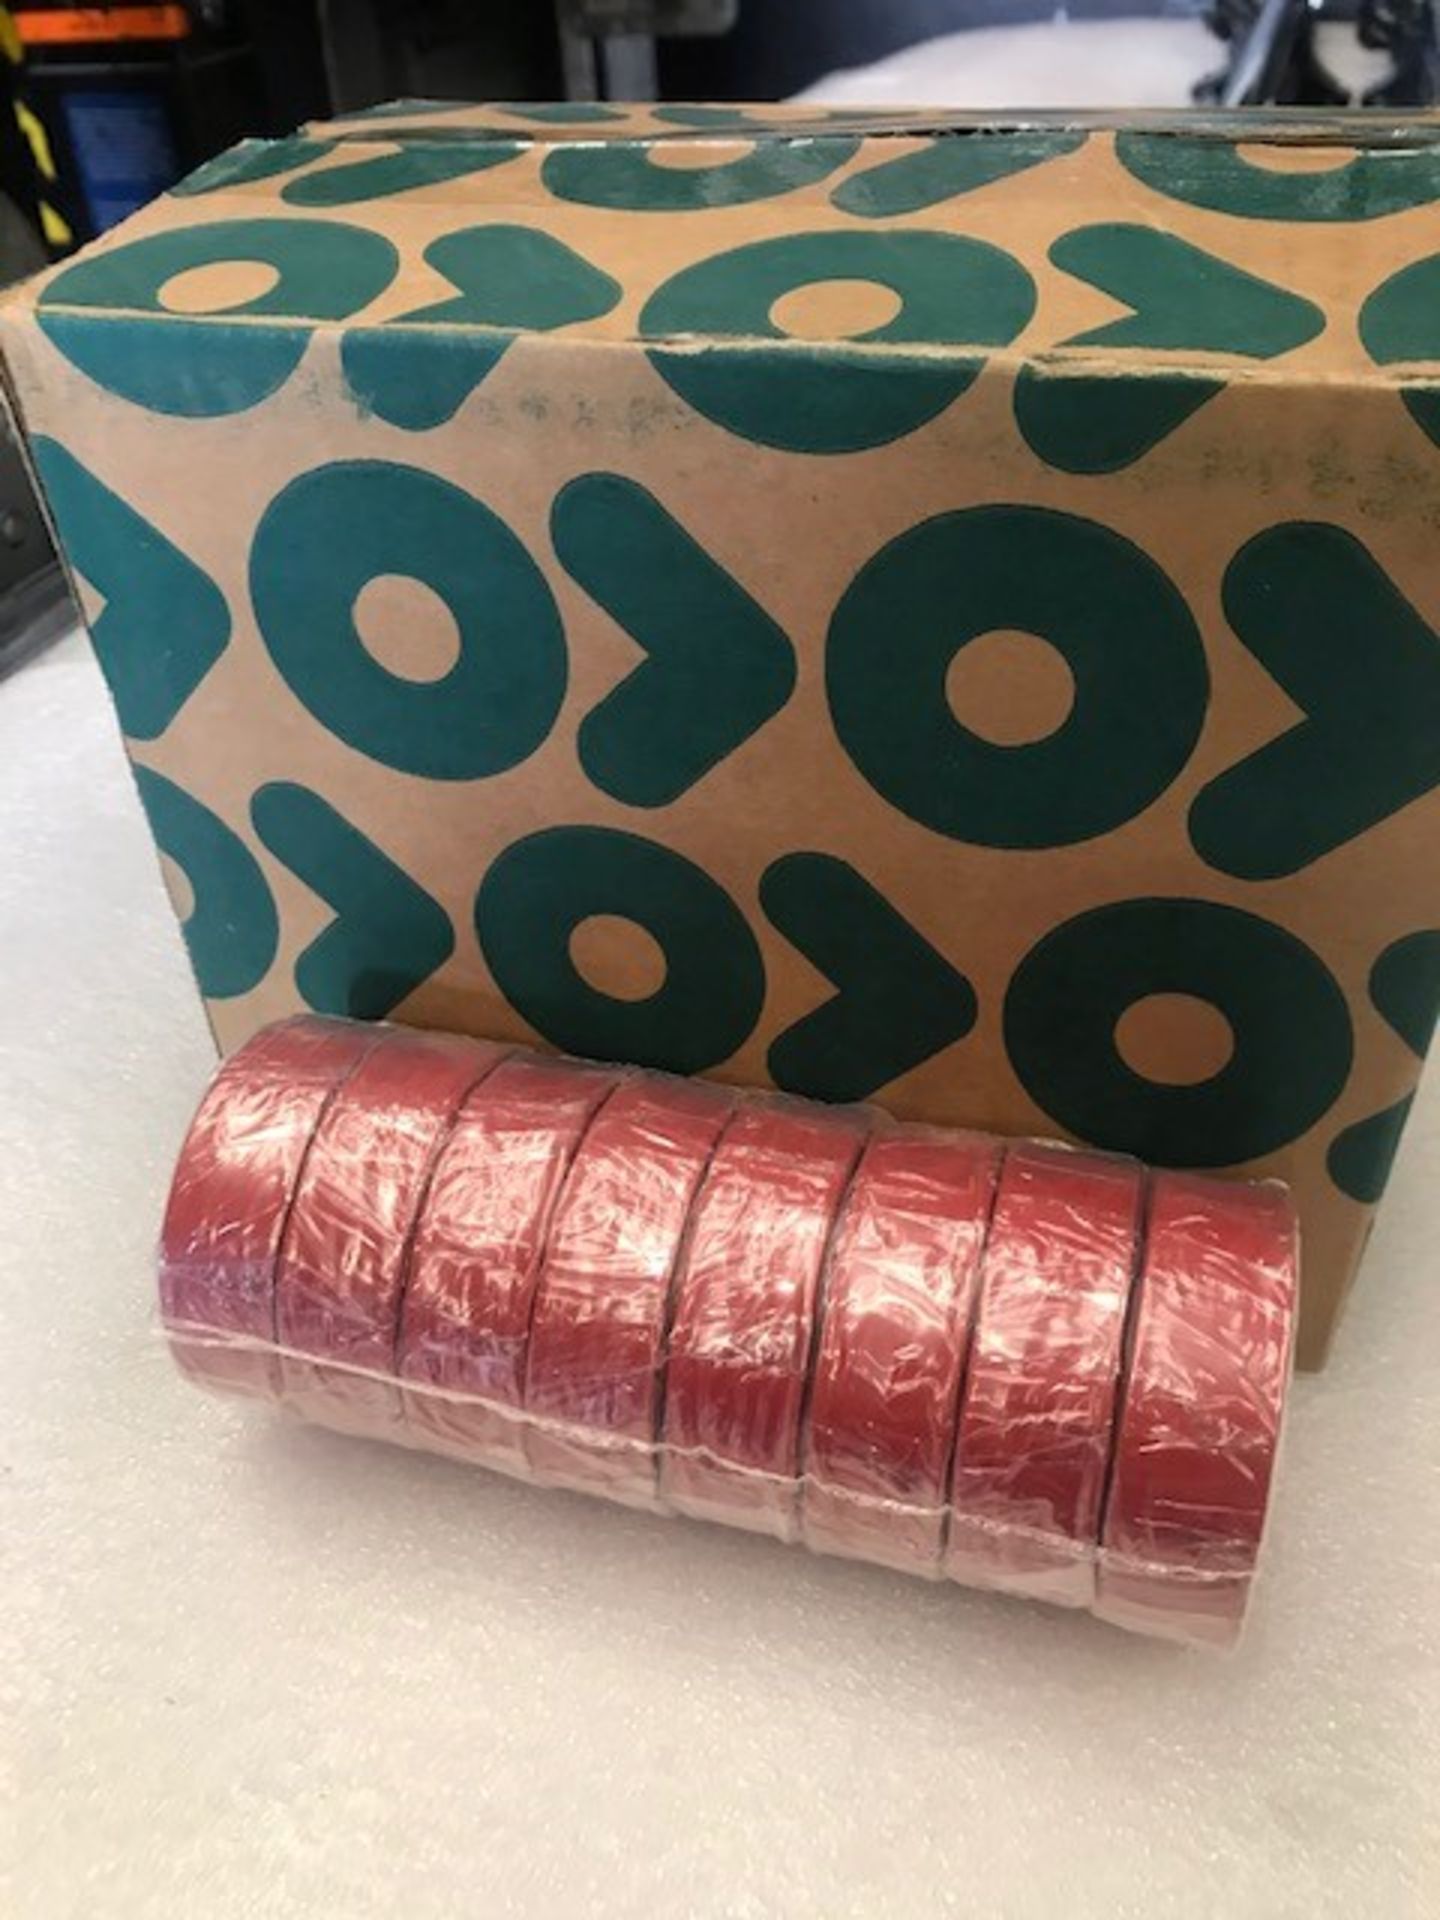 48 x Rolls Of Red PVC Tape - New & Boxed - Ref: 216 - CL581 - Location: Altrincham WA14